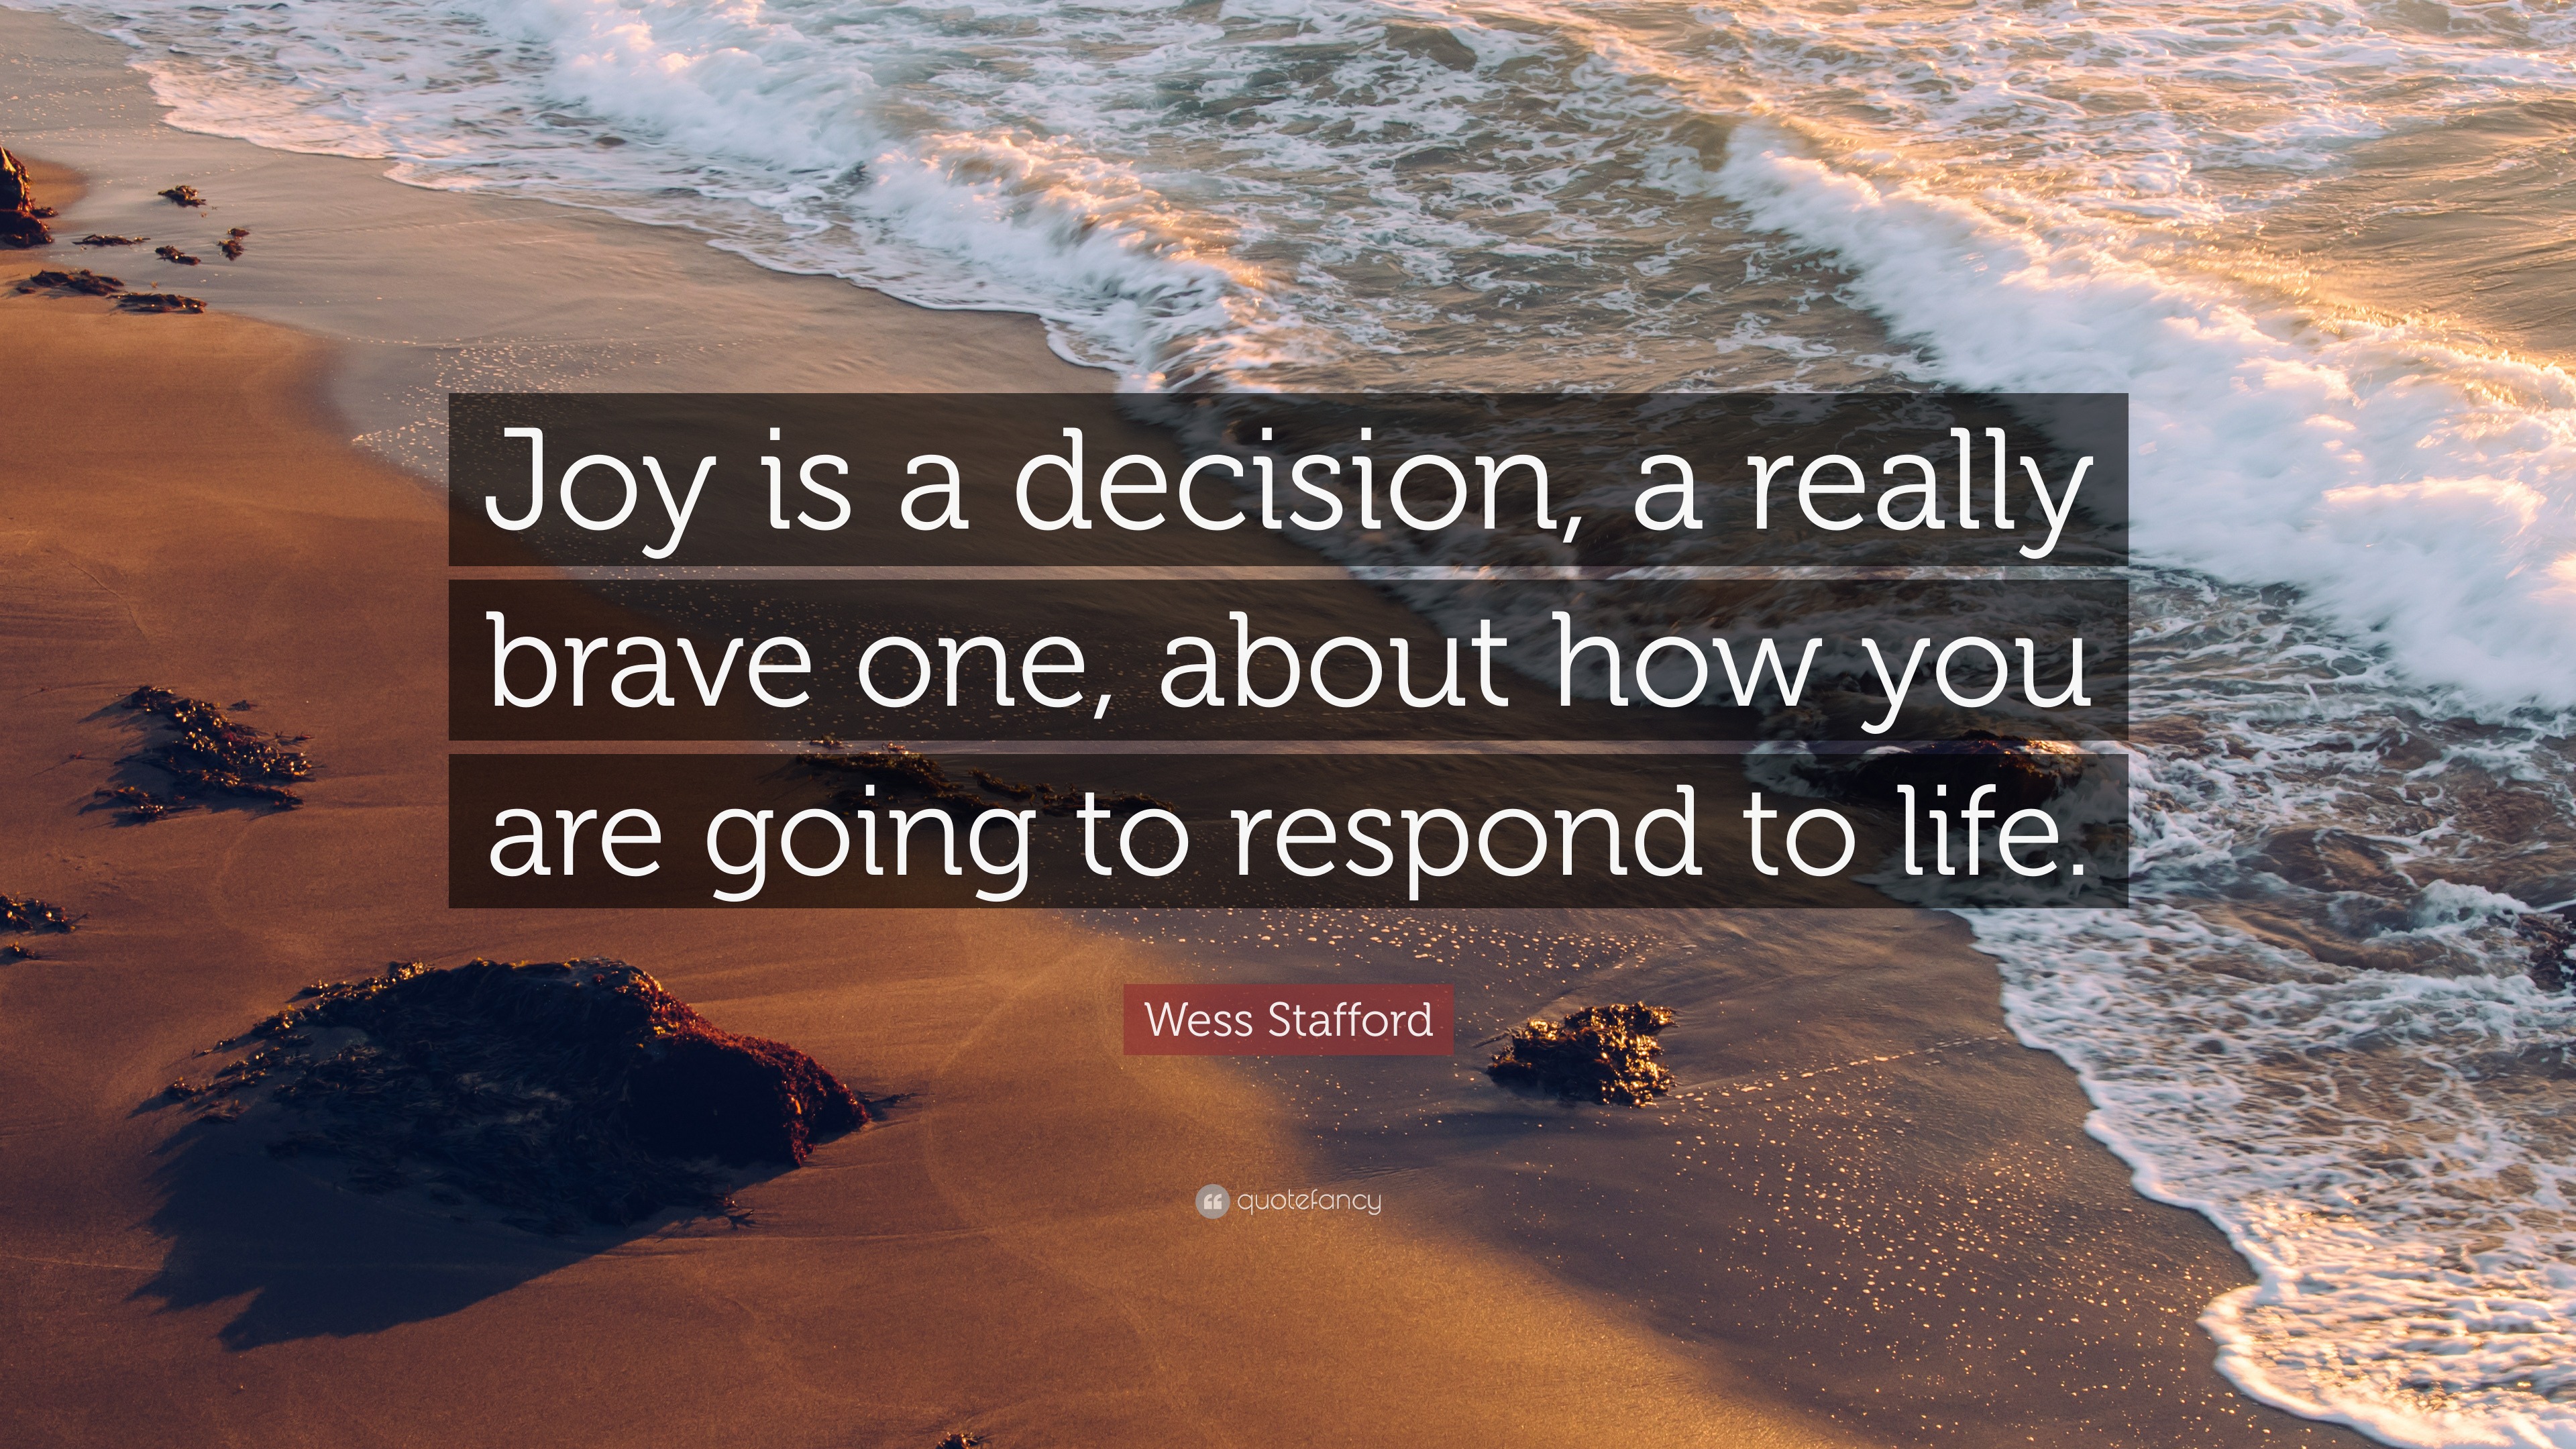 Wess Stafford quote: Joy is a decision, a really brave one, about how